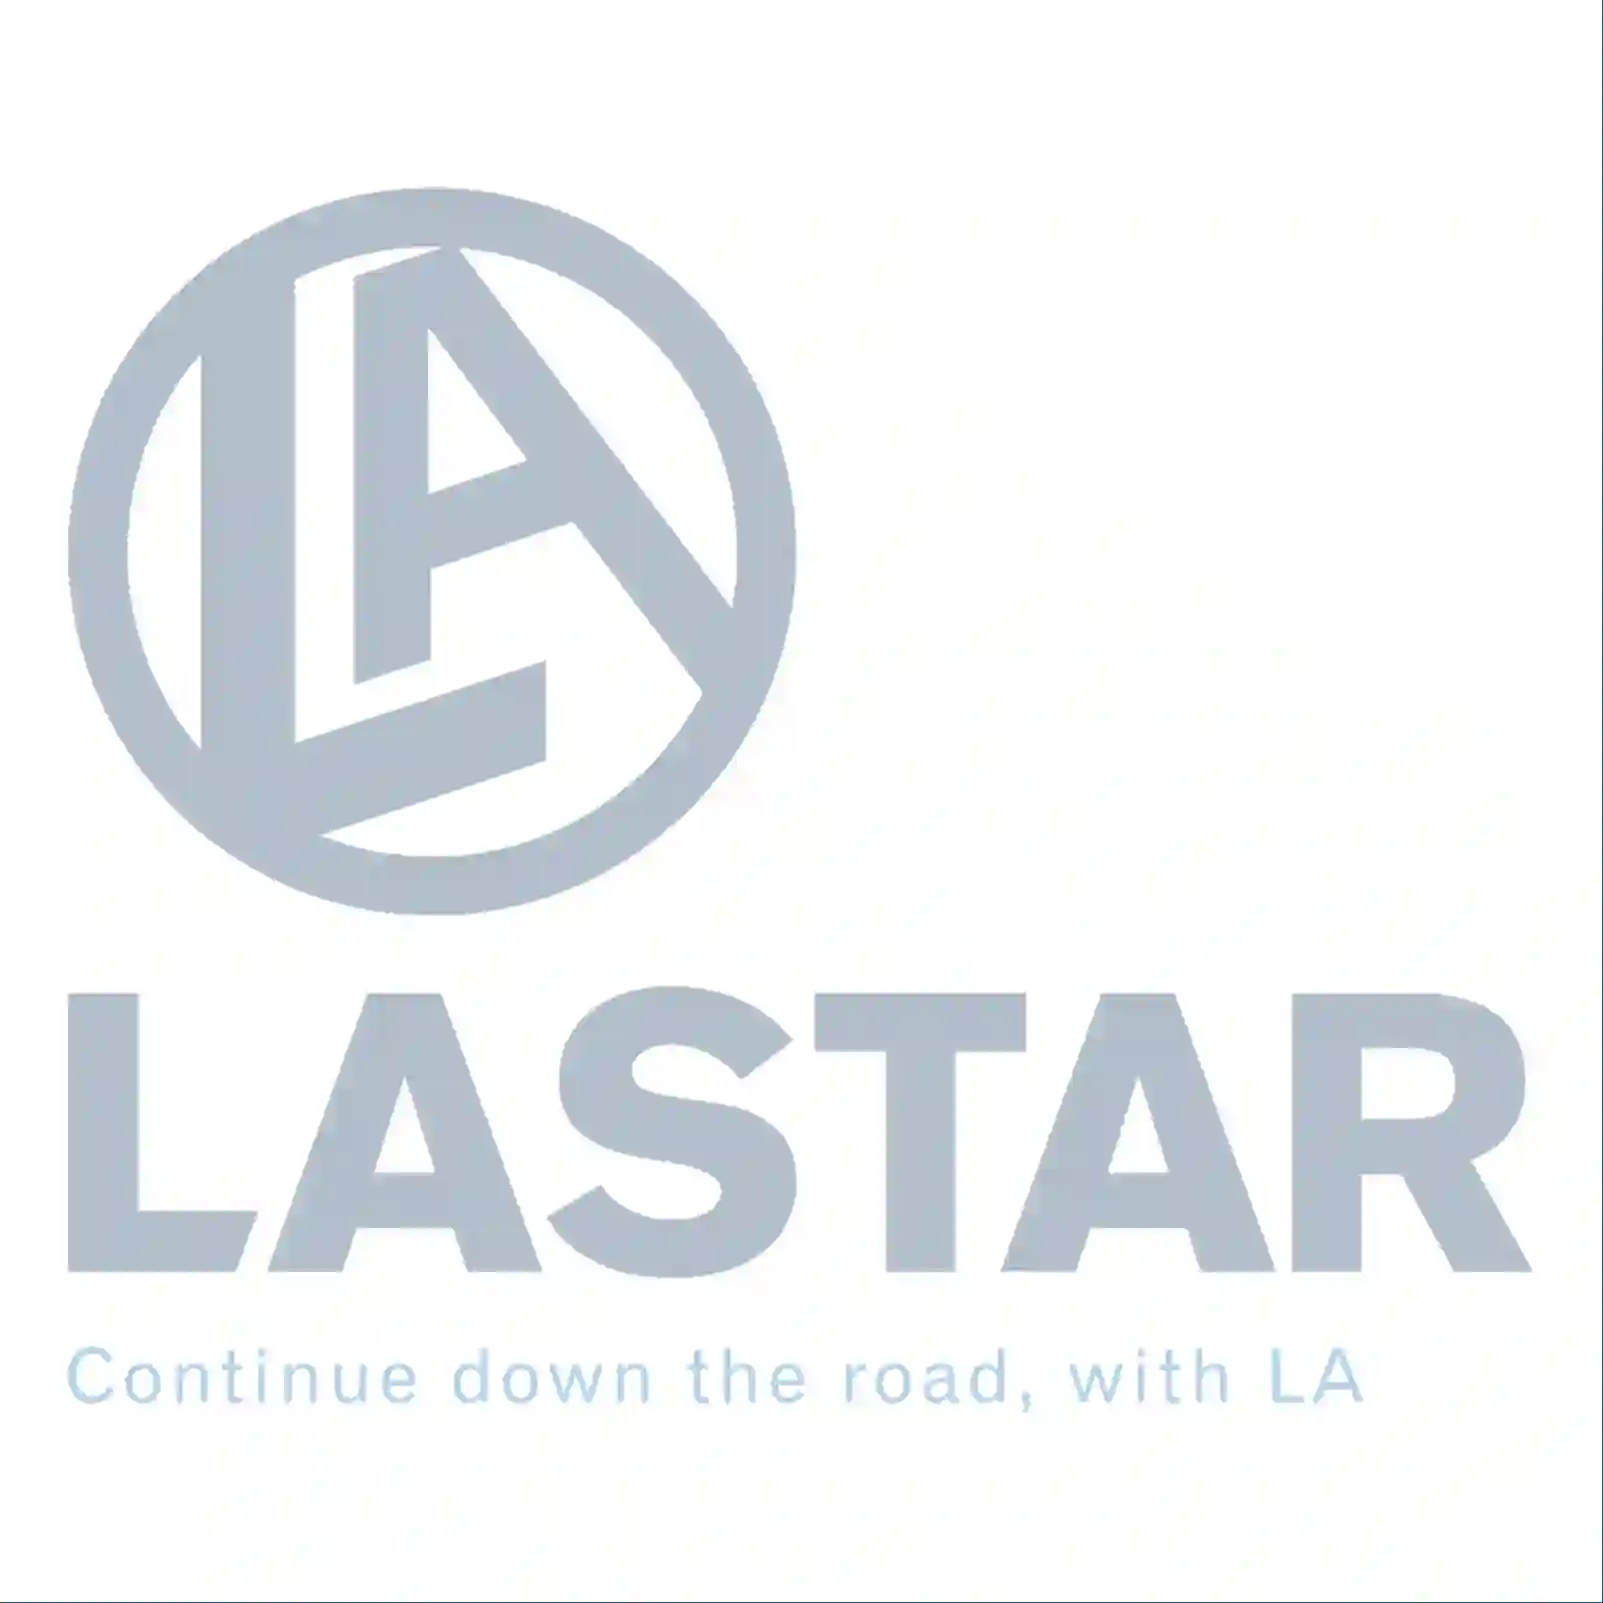  Disc brake pad kit, without wear indicator || Lastar Spare Part | Truck Spare Parts, Auotomotive Spare Parts